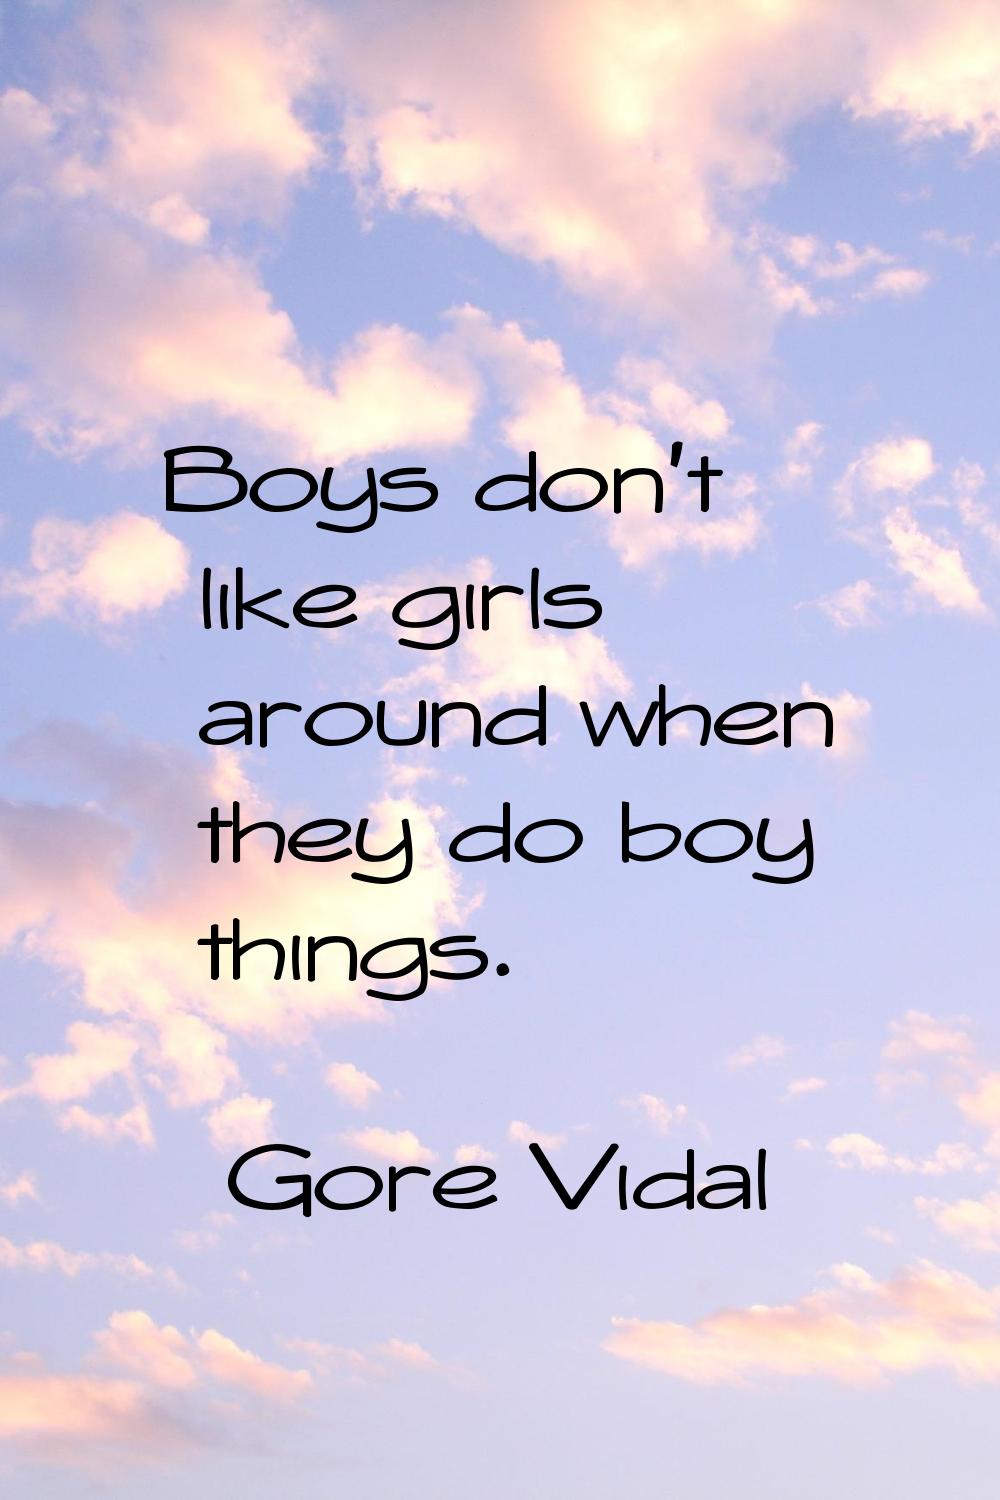 Boys don't like girls around when they do boy things.